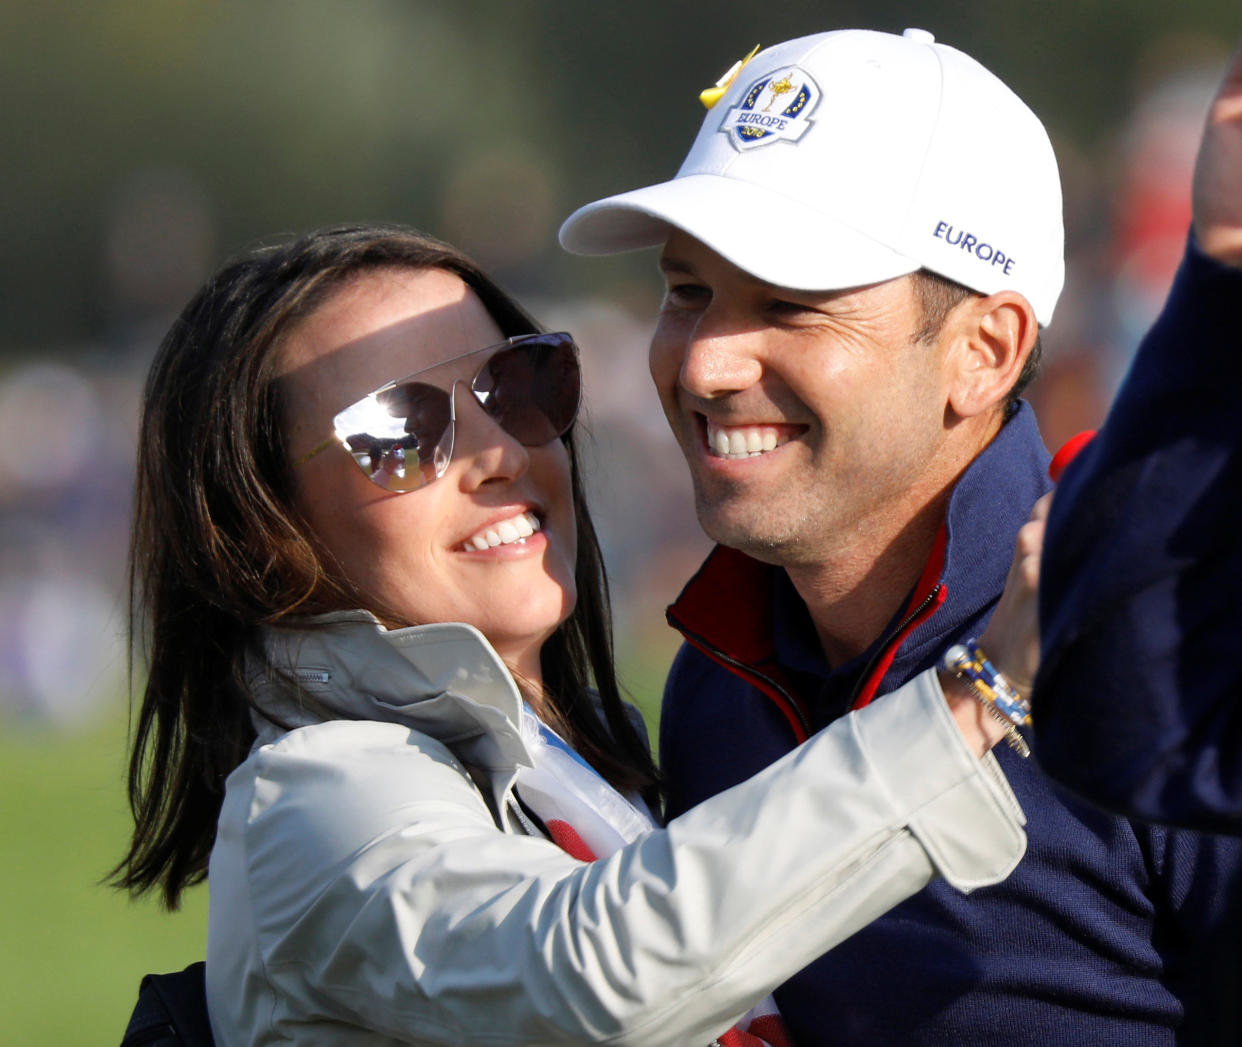 Team Europe's Sergio Garcia celebrates with spouse Angela Garcia after winning his Foursomes match with partner Alex Noren against Team USA's Phil Mickelson and Bryson DeChambeau  REUTERS/Charles Platiau